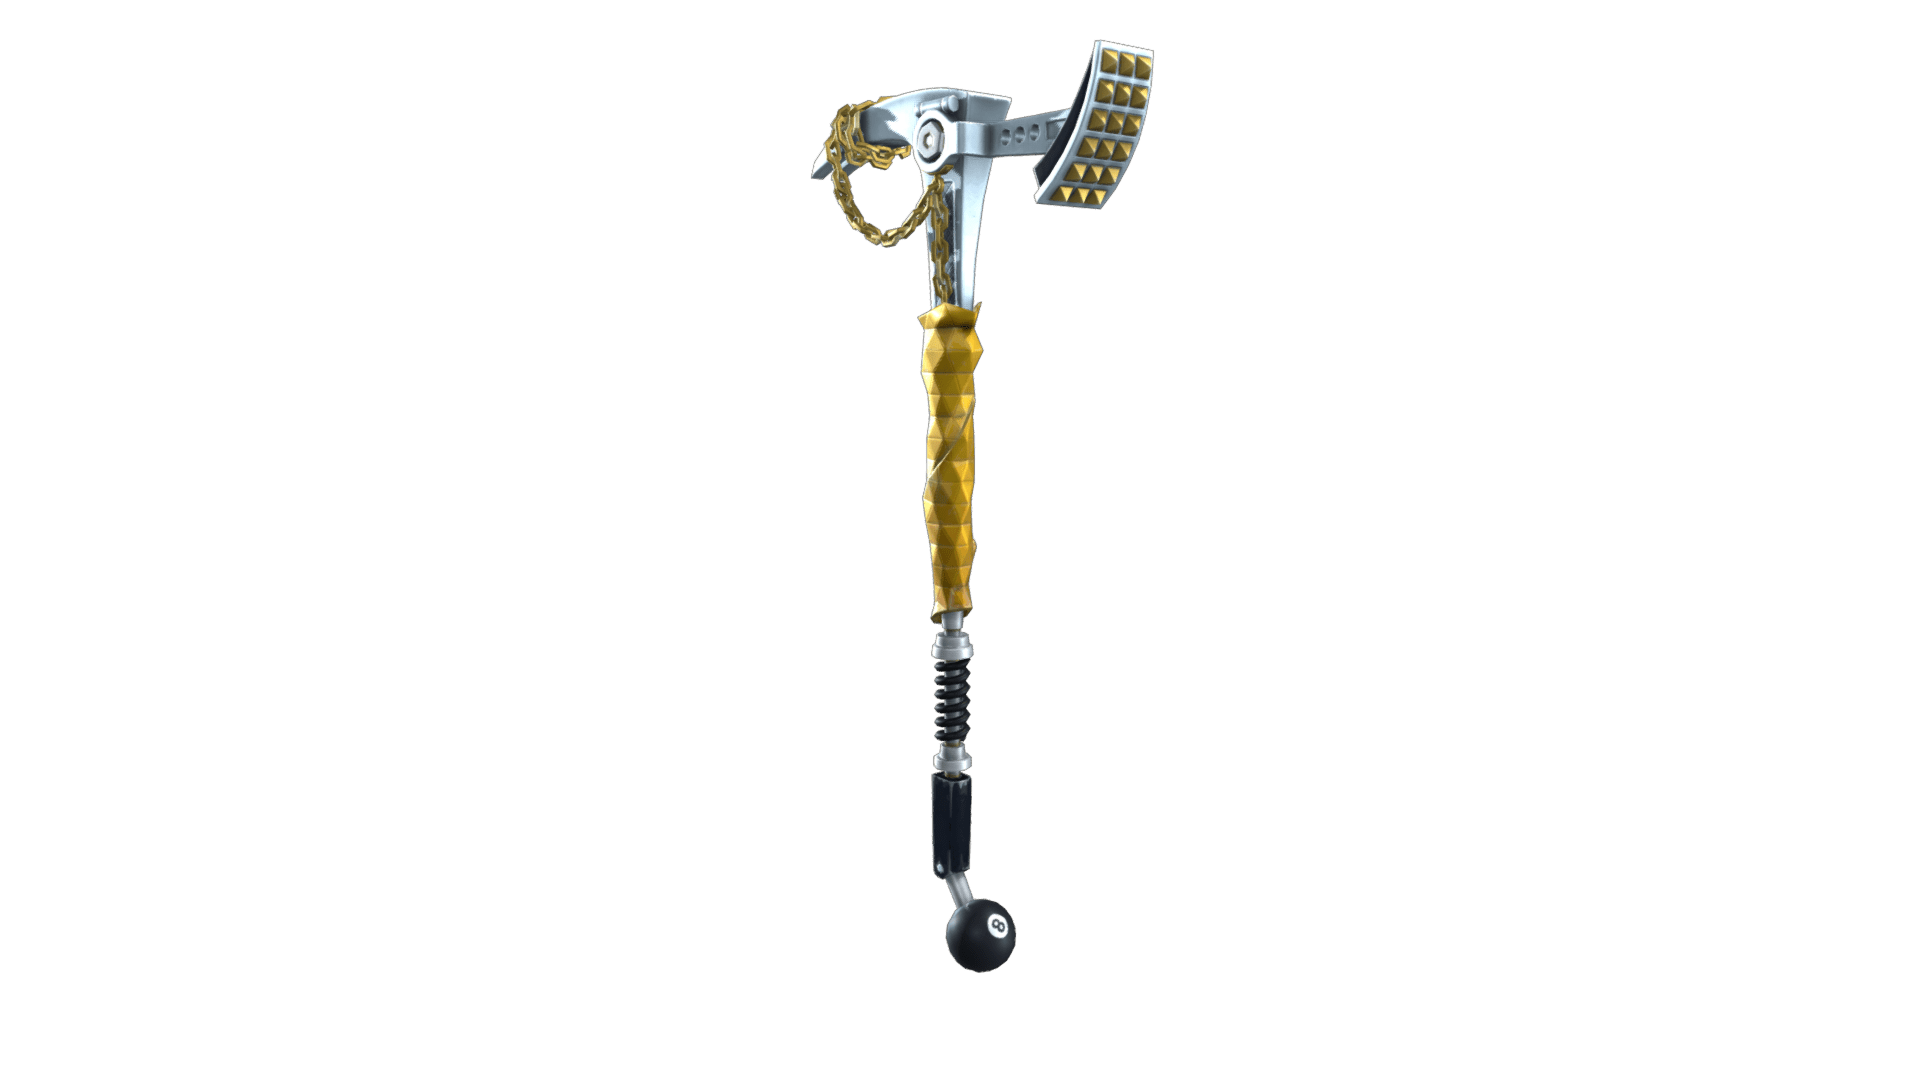 Free download Fortnite Clutch Axe Harvesting Tool Rare